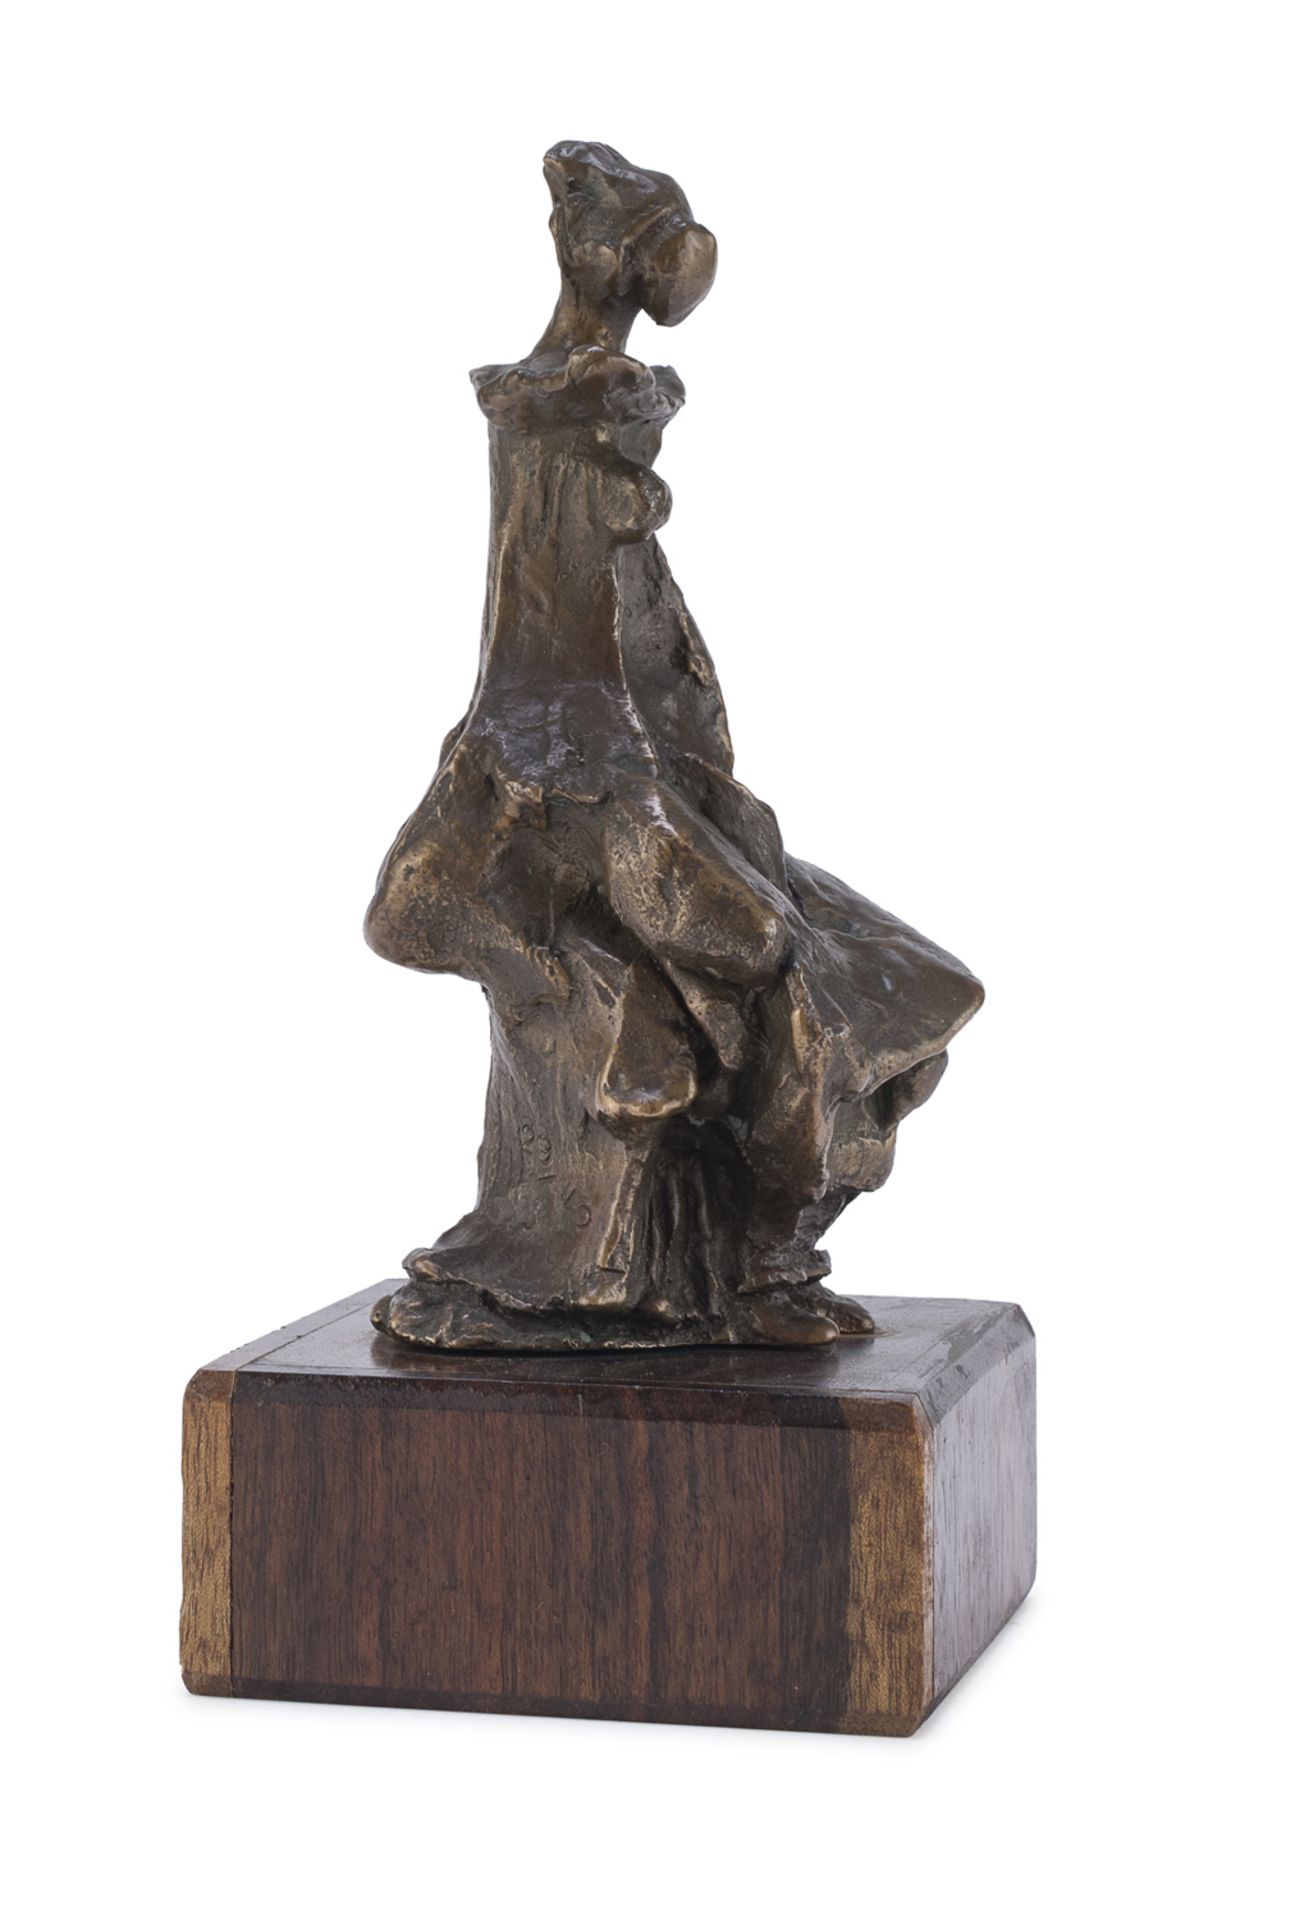 MULTIPLE BRONZE SCULPTURE OF A SITTING WOMAN 20TH CENTURY - Image 2 of 2